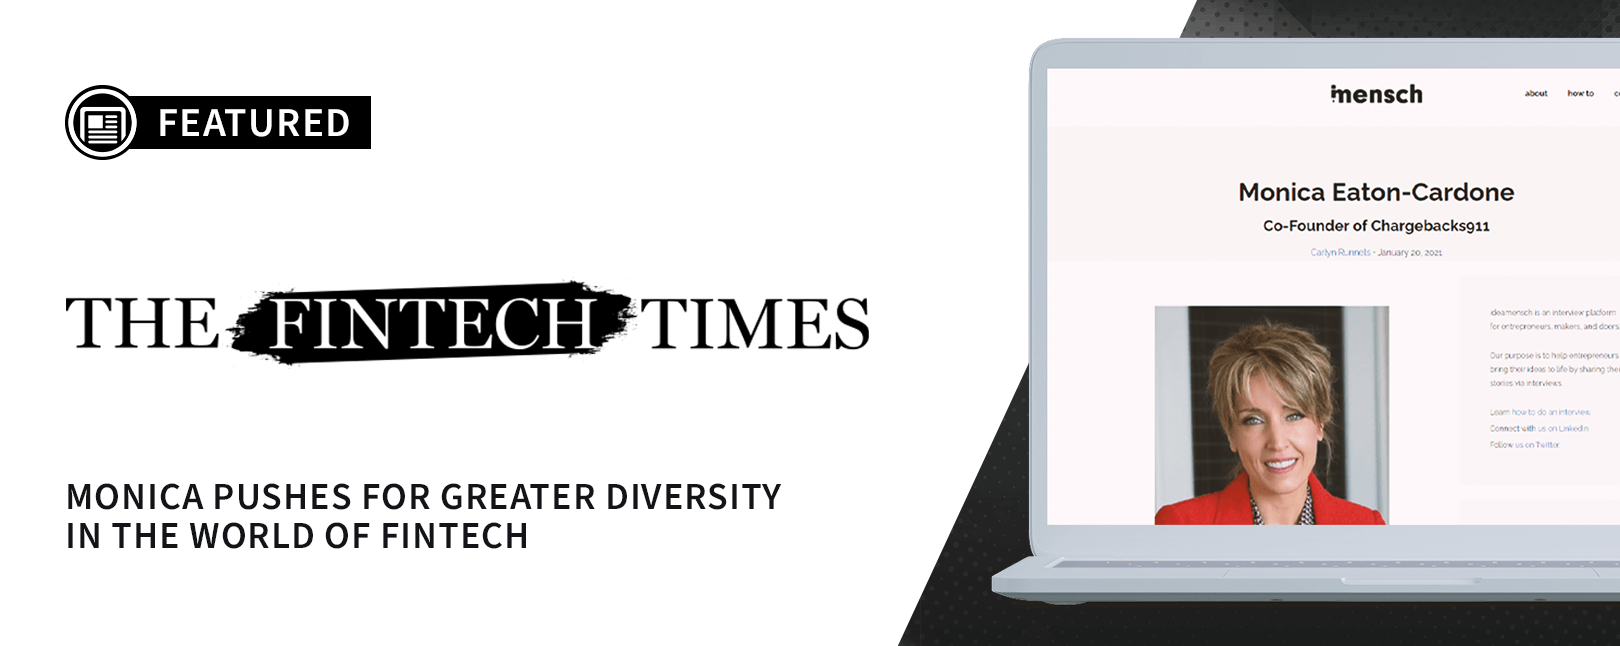 New Gender Equality Initiative Spotlighted in The Fintech Times